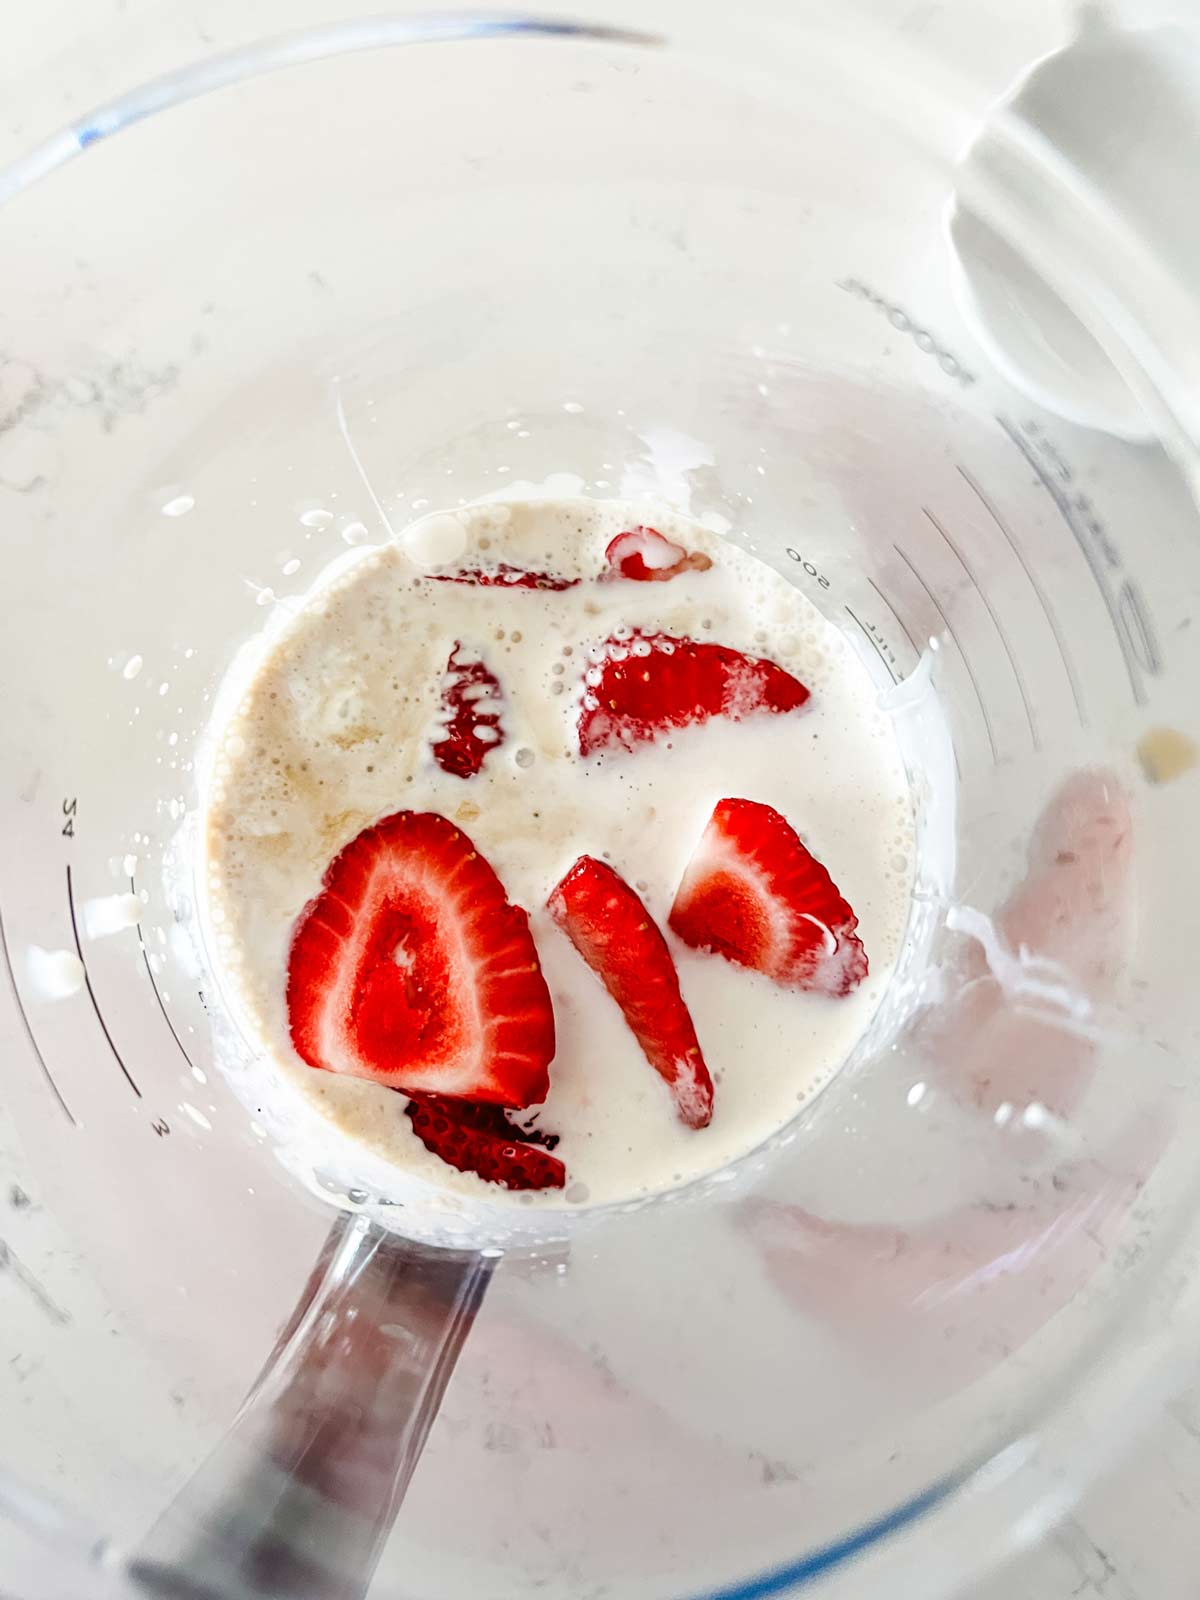 The base for strawberry ice cream in a blender ready to blend.